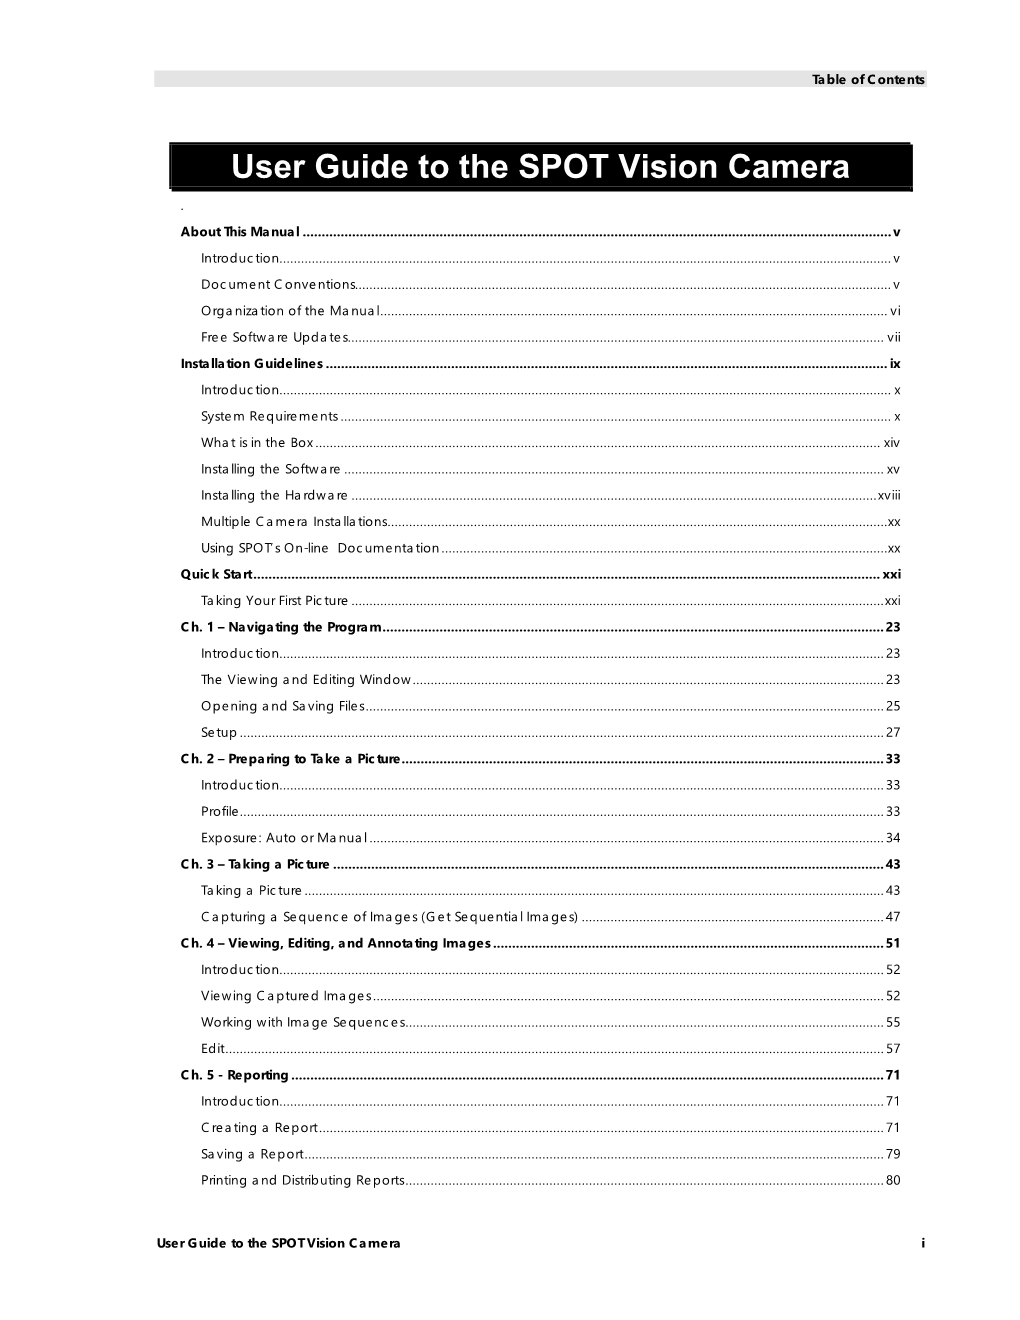 User Guide to the SPOT Vision Camera